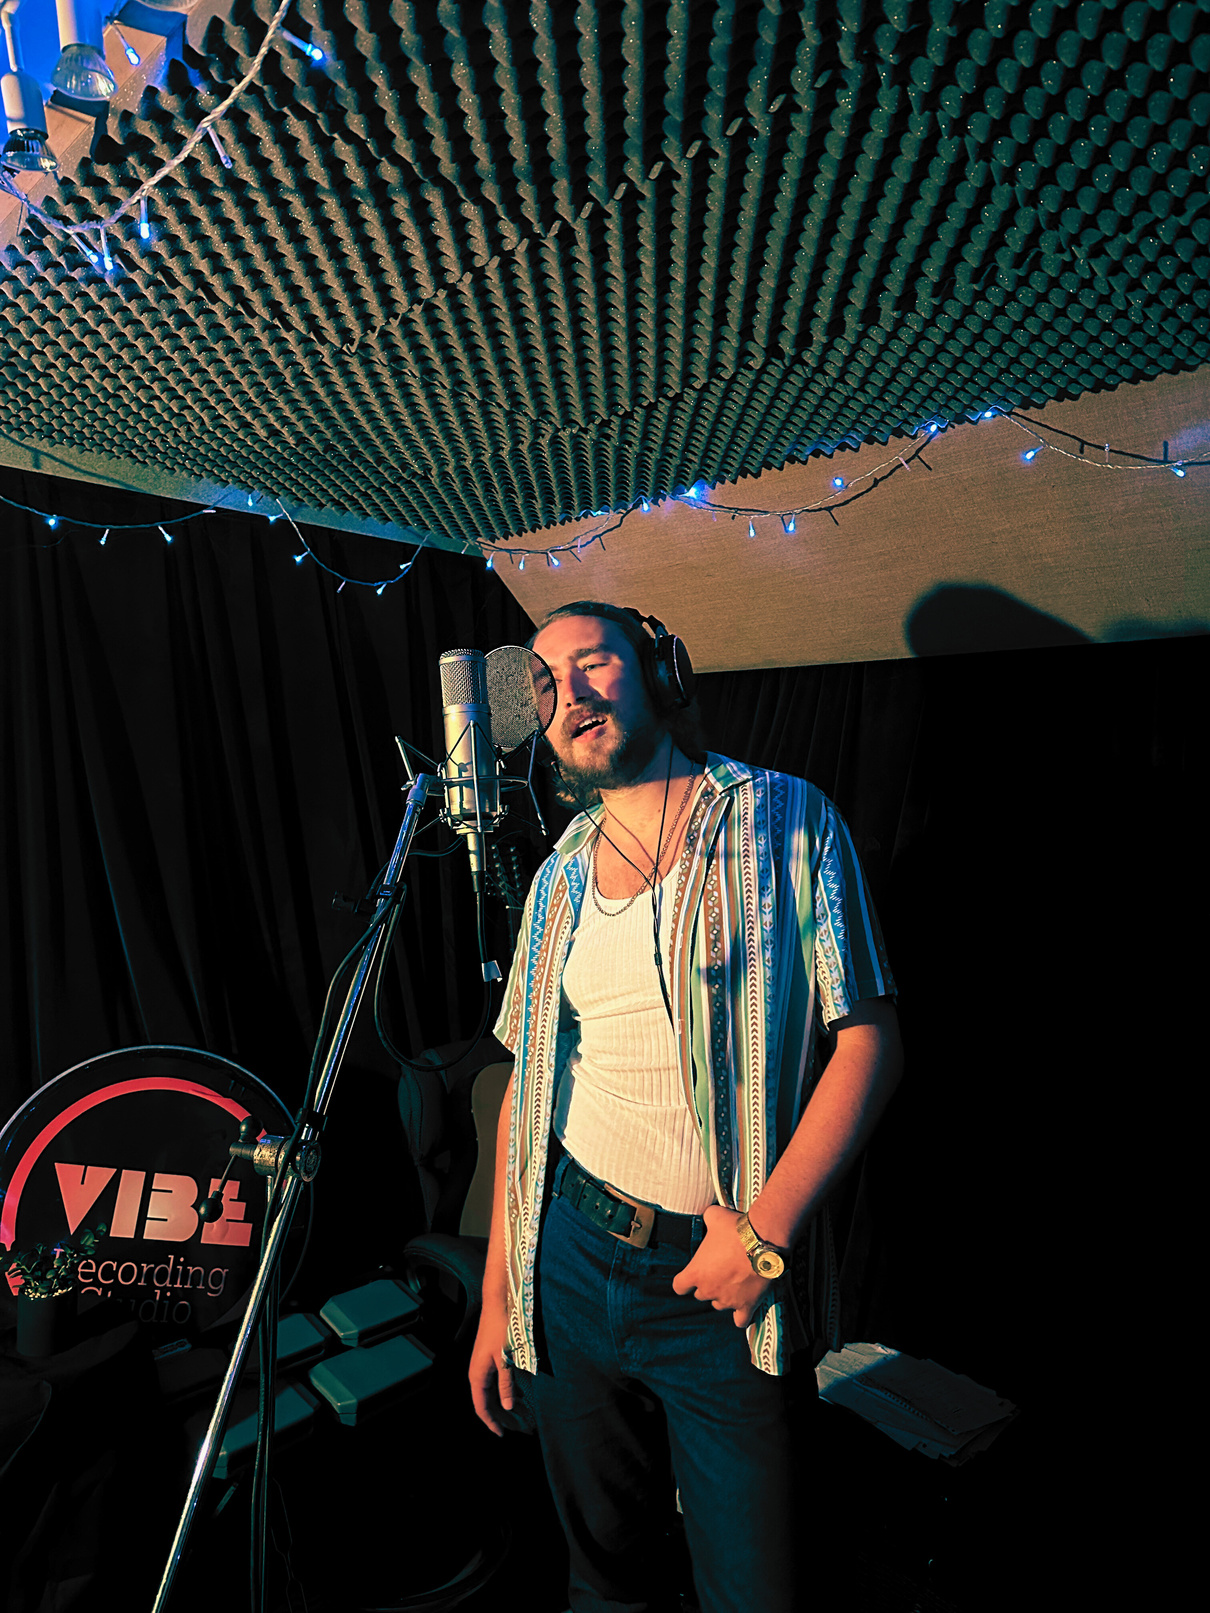 Ethan, stood one half to his side, one hand hanging off his belt, sings confidently into the VIBE Recording Studio microphone in Manchester. The vocal booth is laden with long curtains, acoustic treatment and fancy fairy lights round the top.